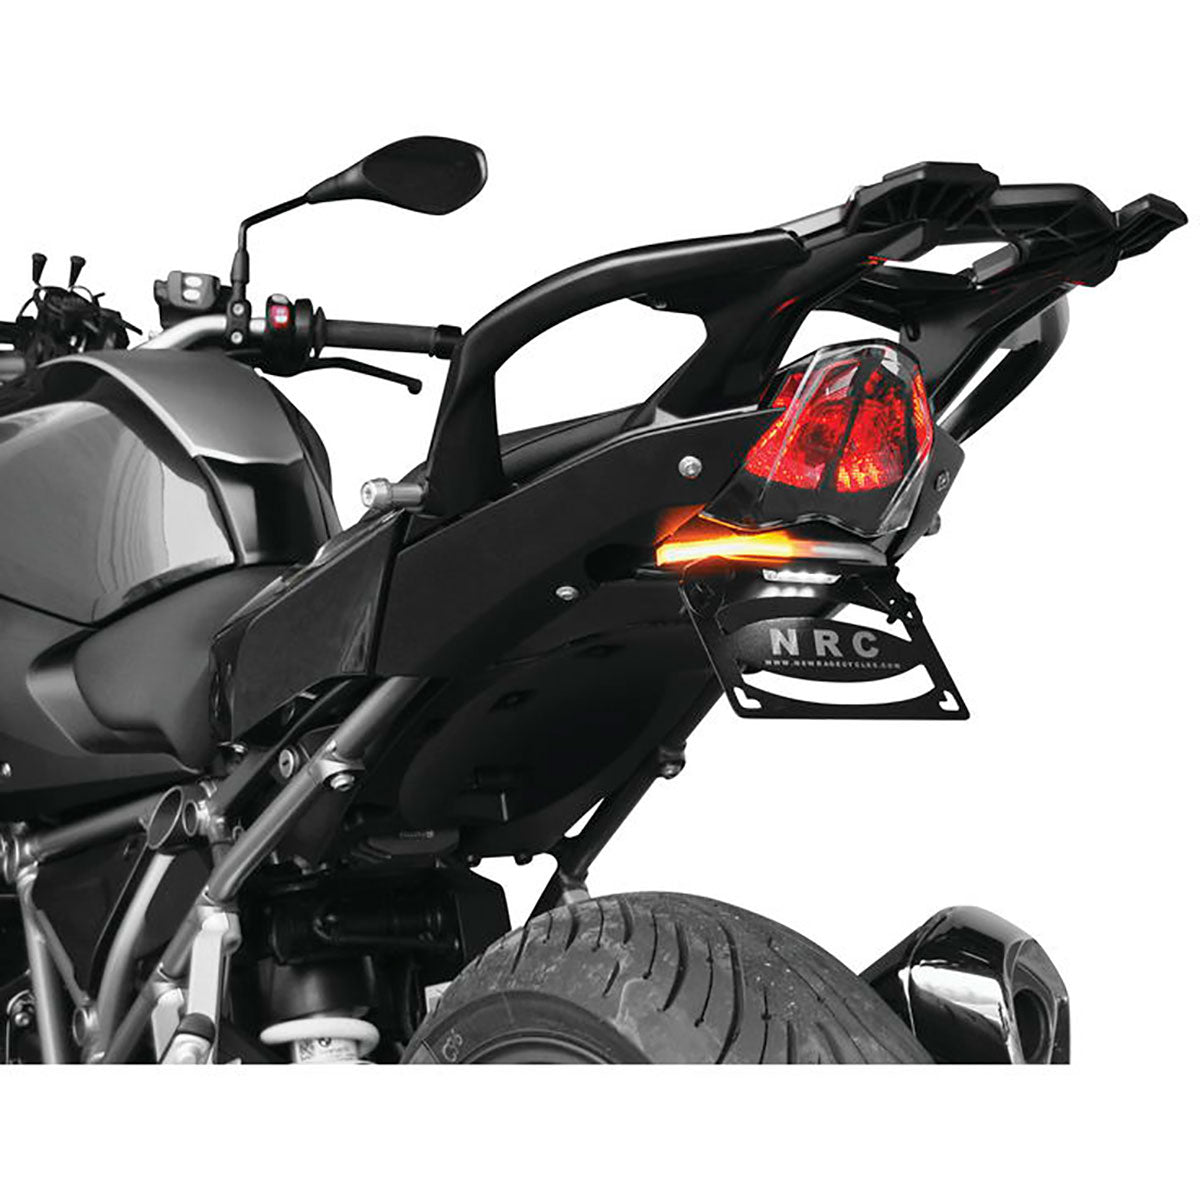 Motorcycle - | BMW Fender Haustrom.com Cycles New LED Rage Eliminator Accessor Shop – Sports Action R1200R